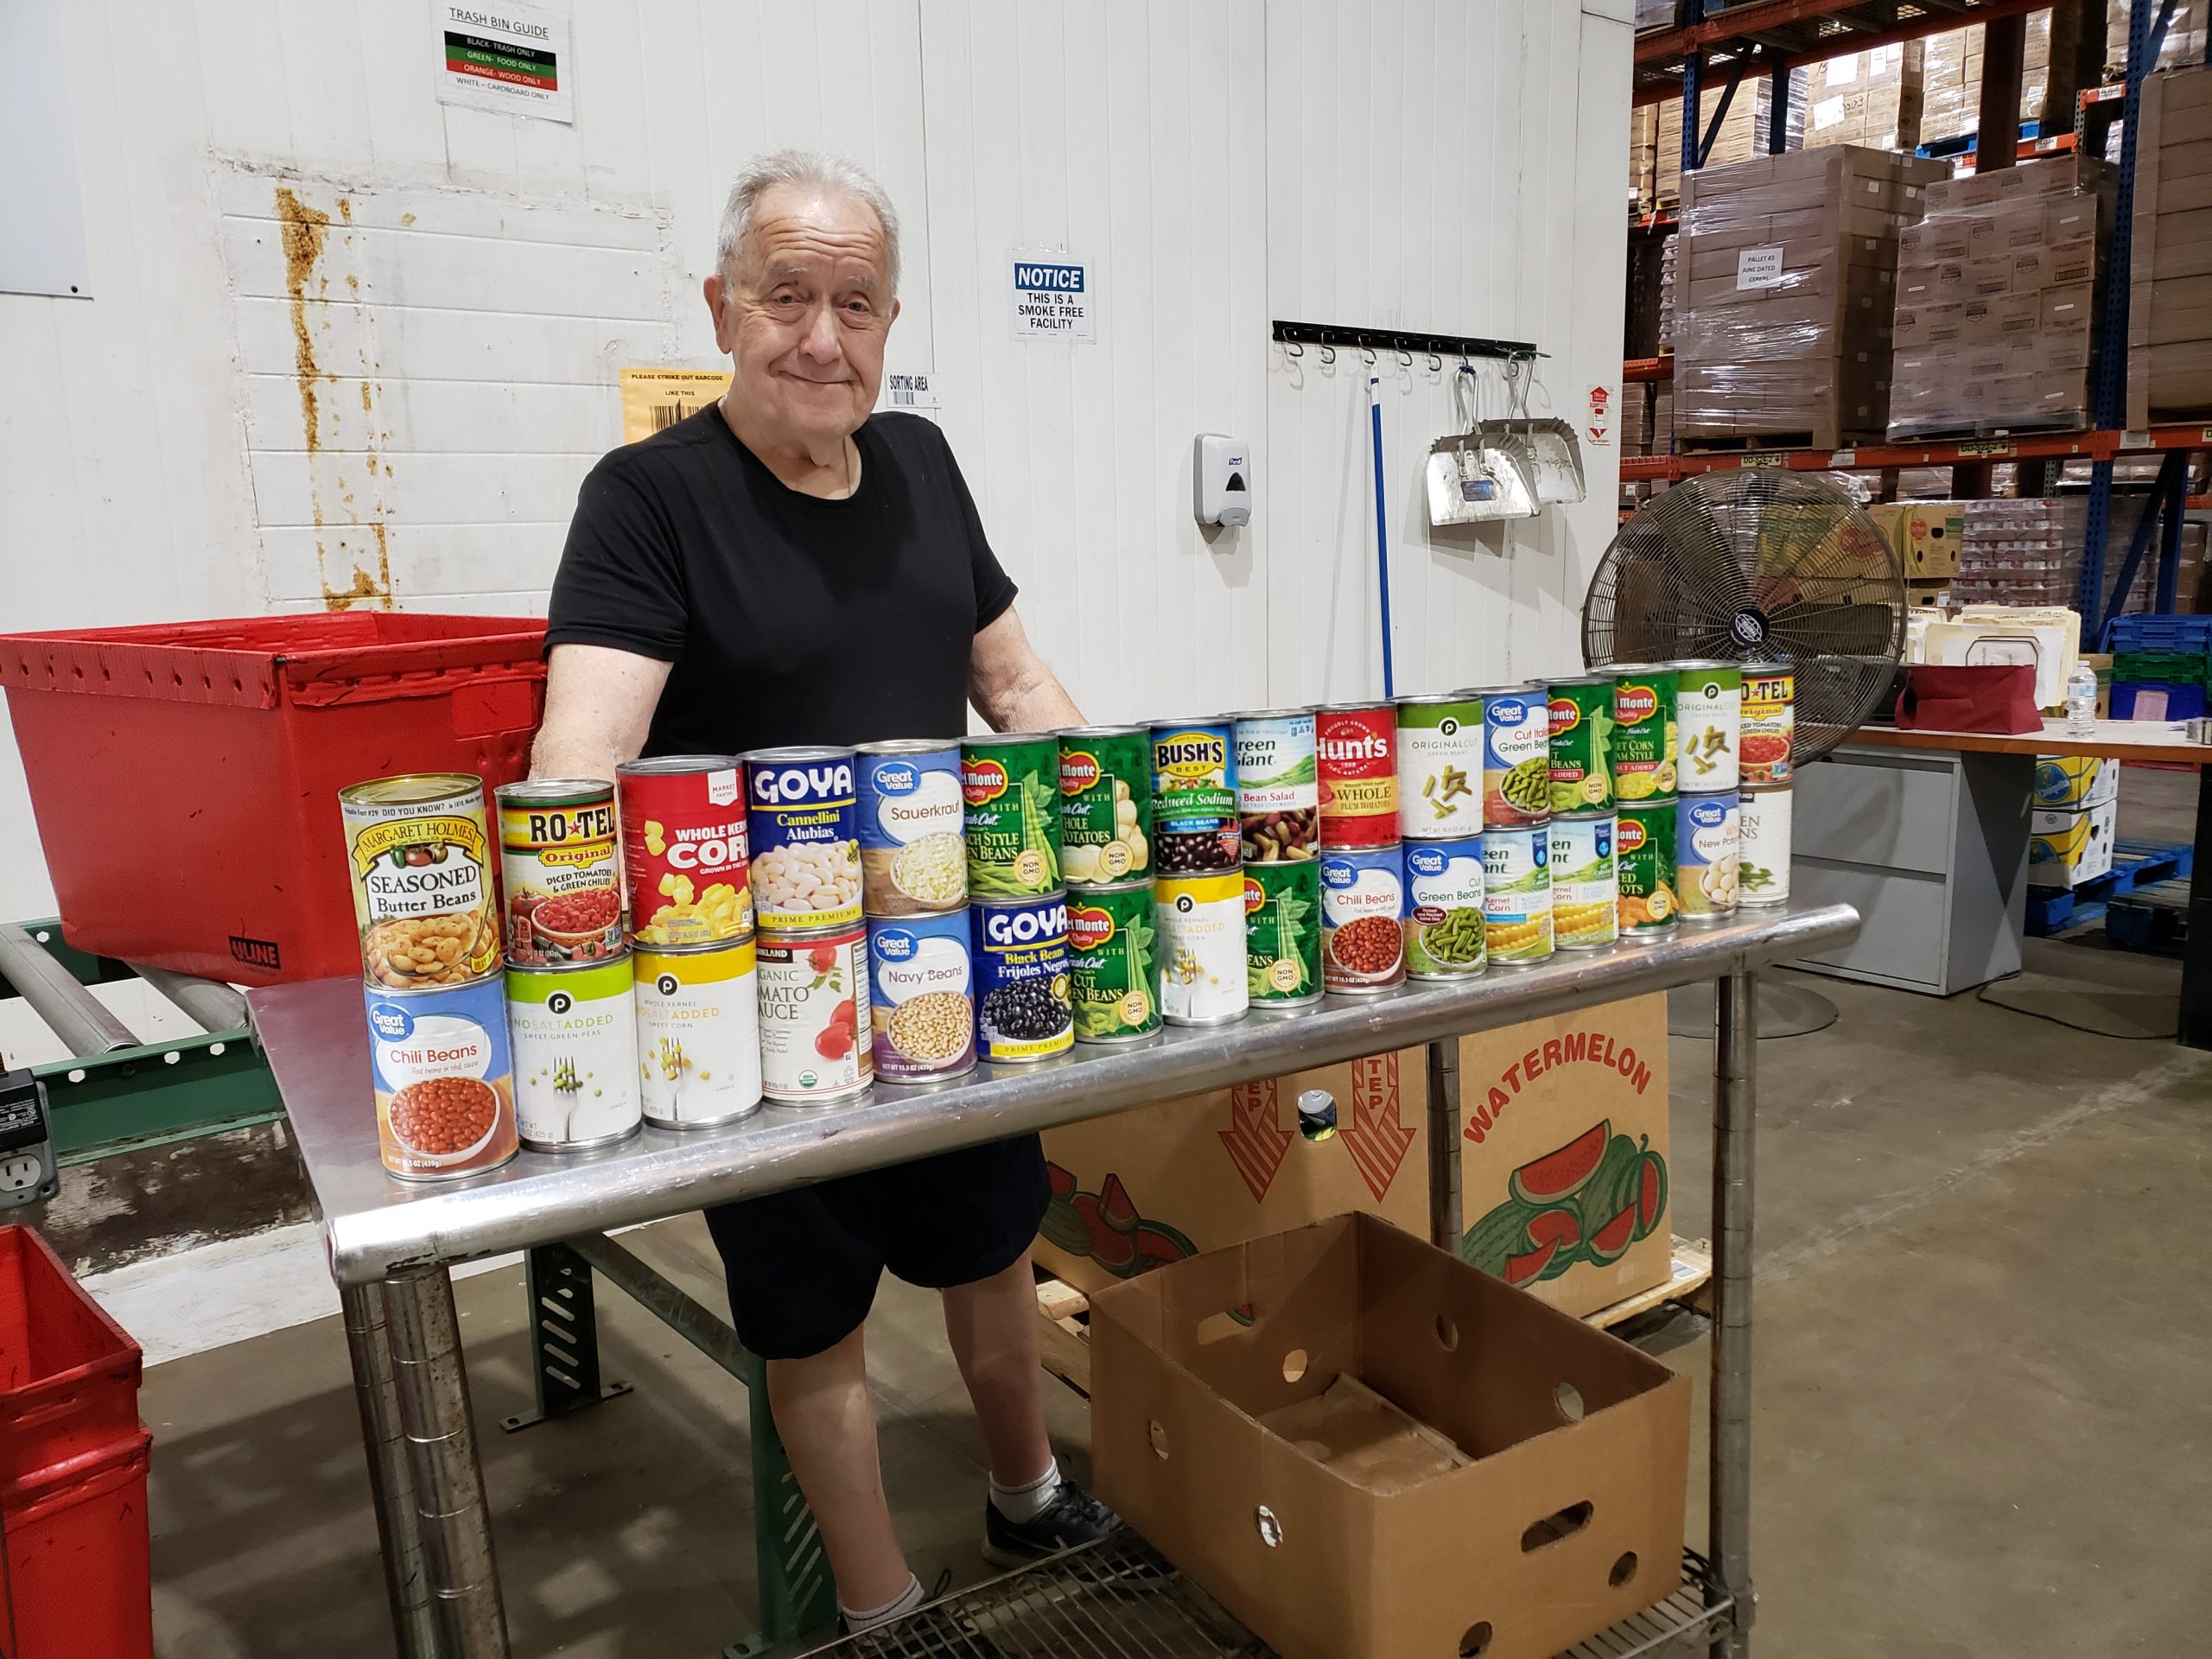 VOLUNTEER – John Martin is a legacy volunteer at Second Harvest who donates more than 1,000 hours per year.